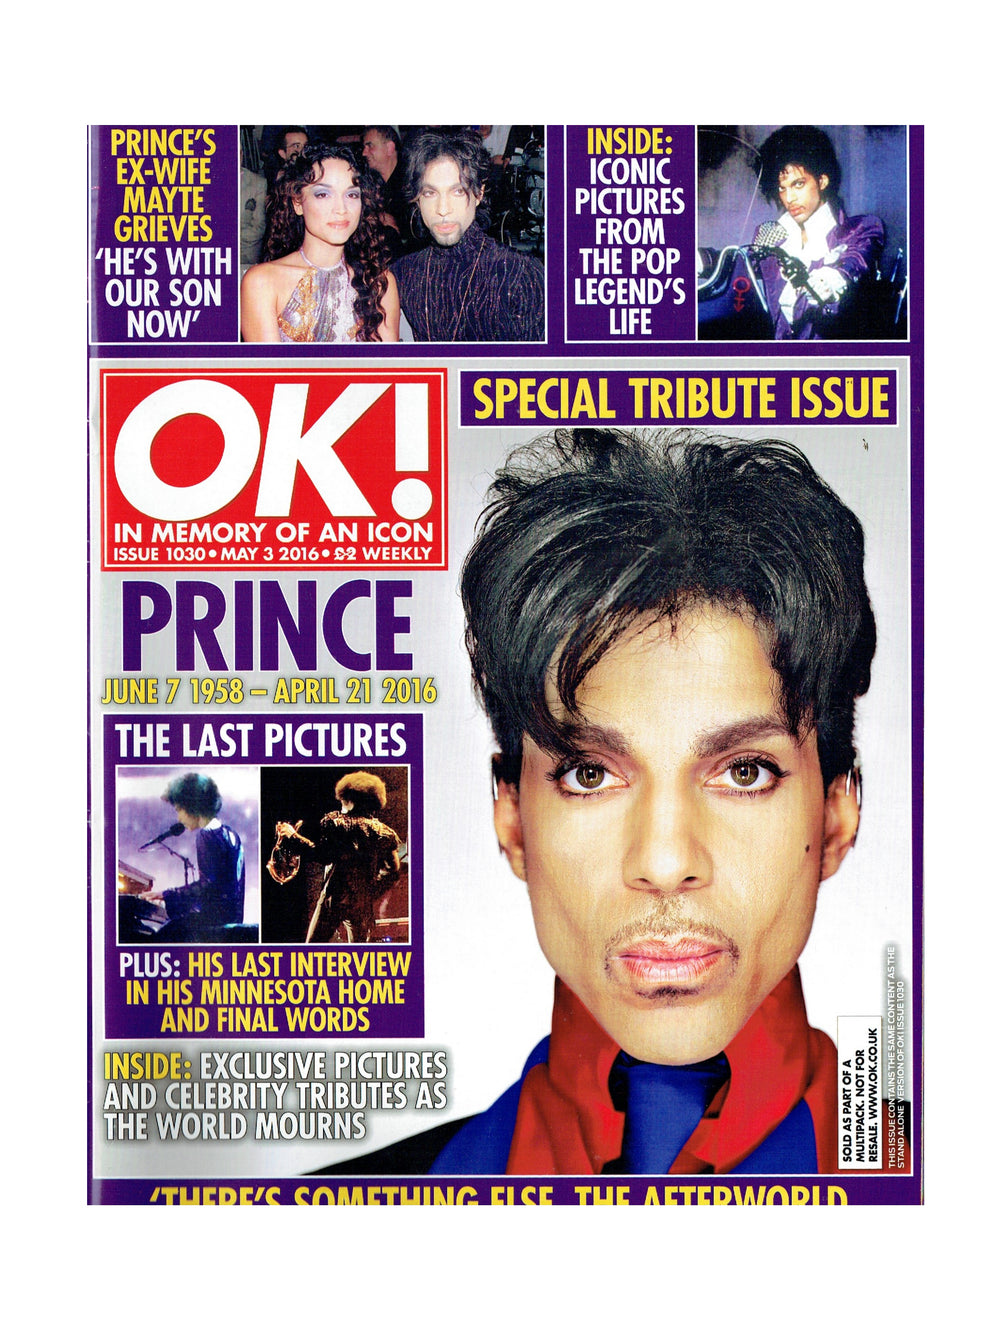 Prince OK! Magazine Tribute Issue May 2016 Front Cover & 17 Page Article